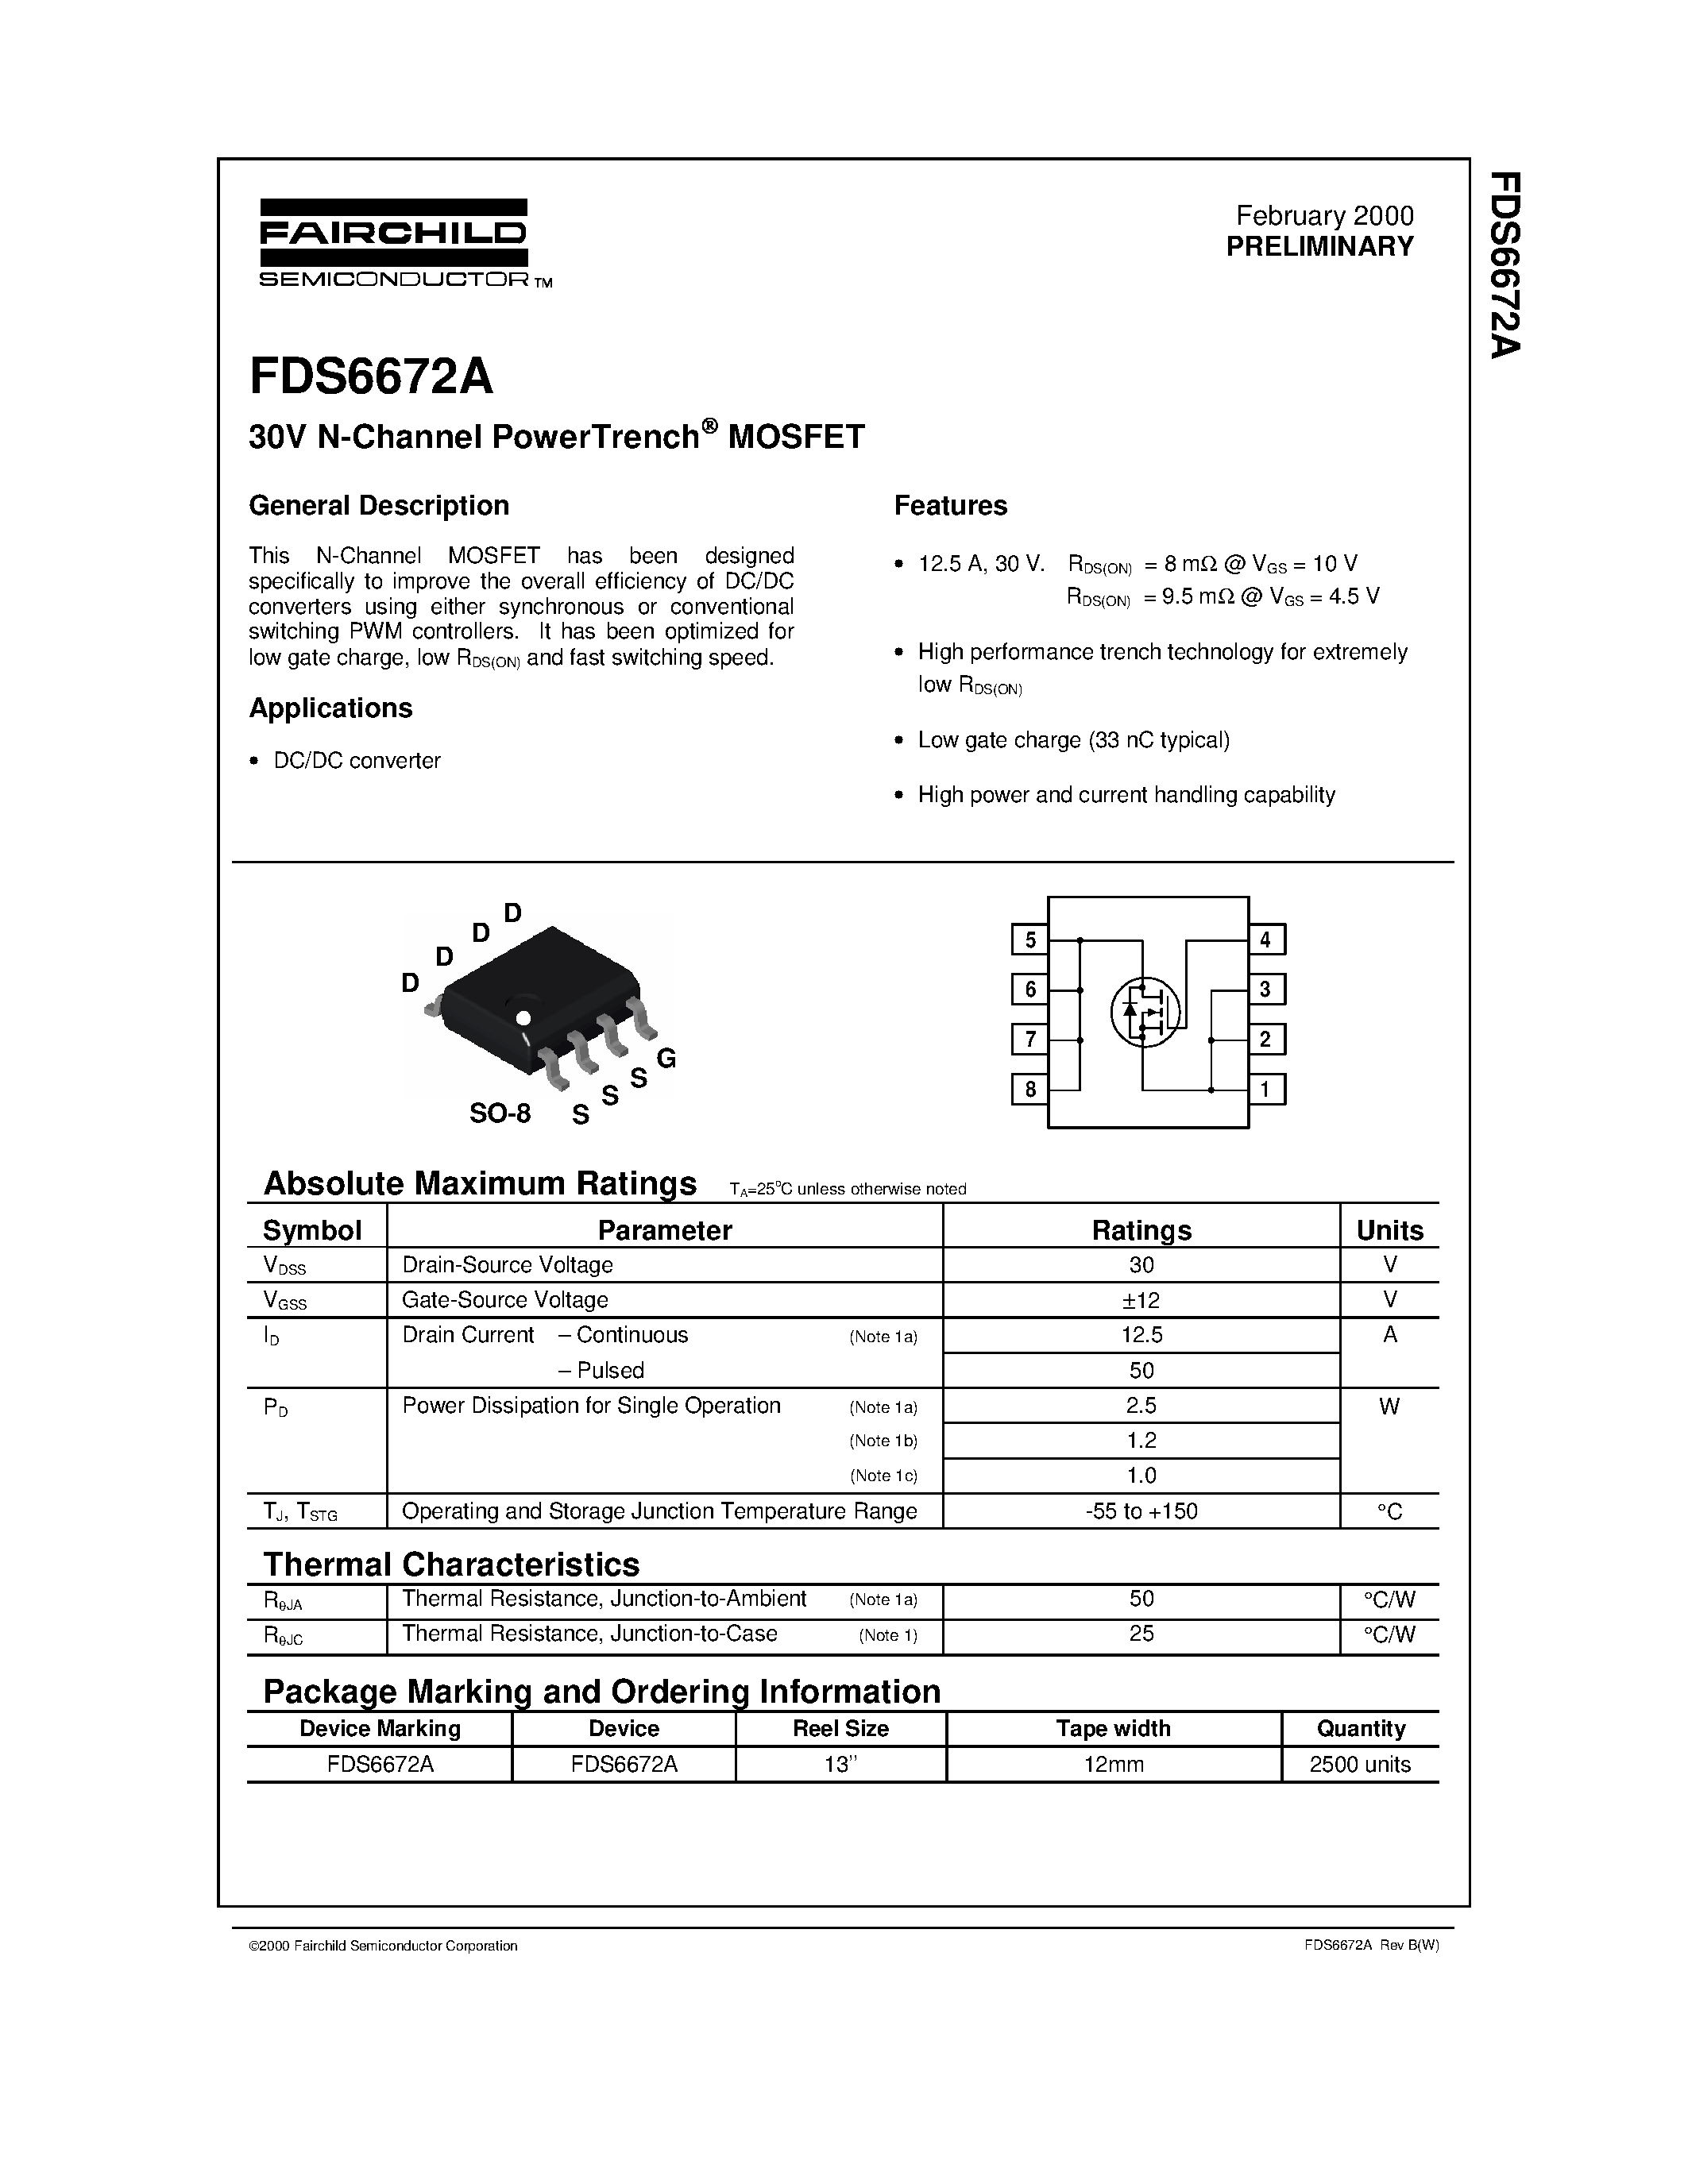 Даташит FDS6672A - 30V N-Channel PowerTrench MOSFET страница 1